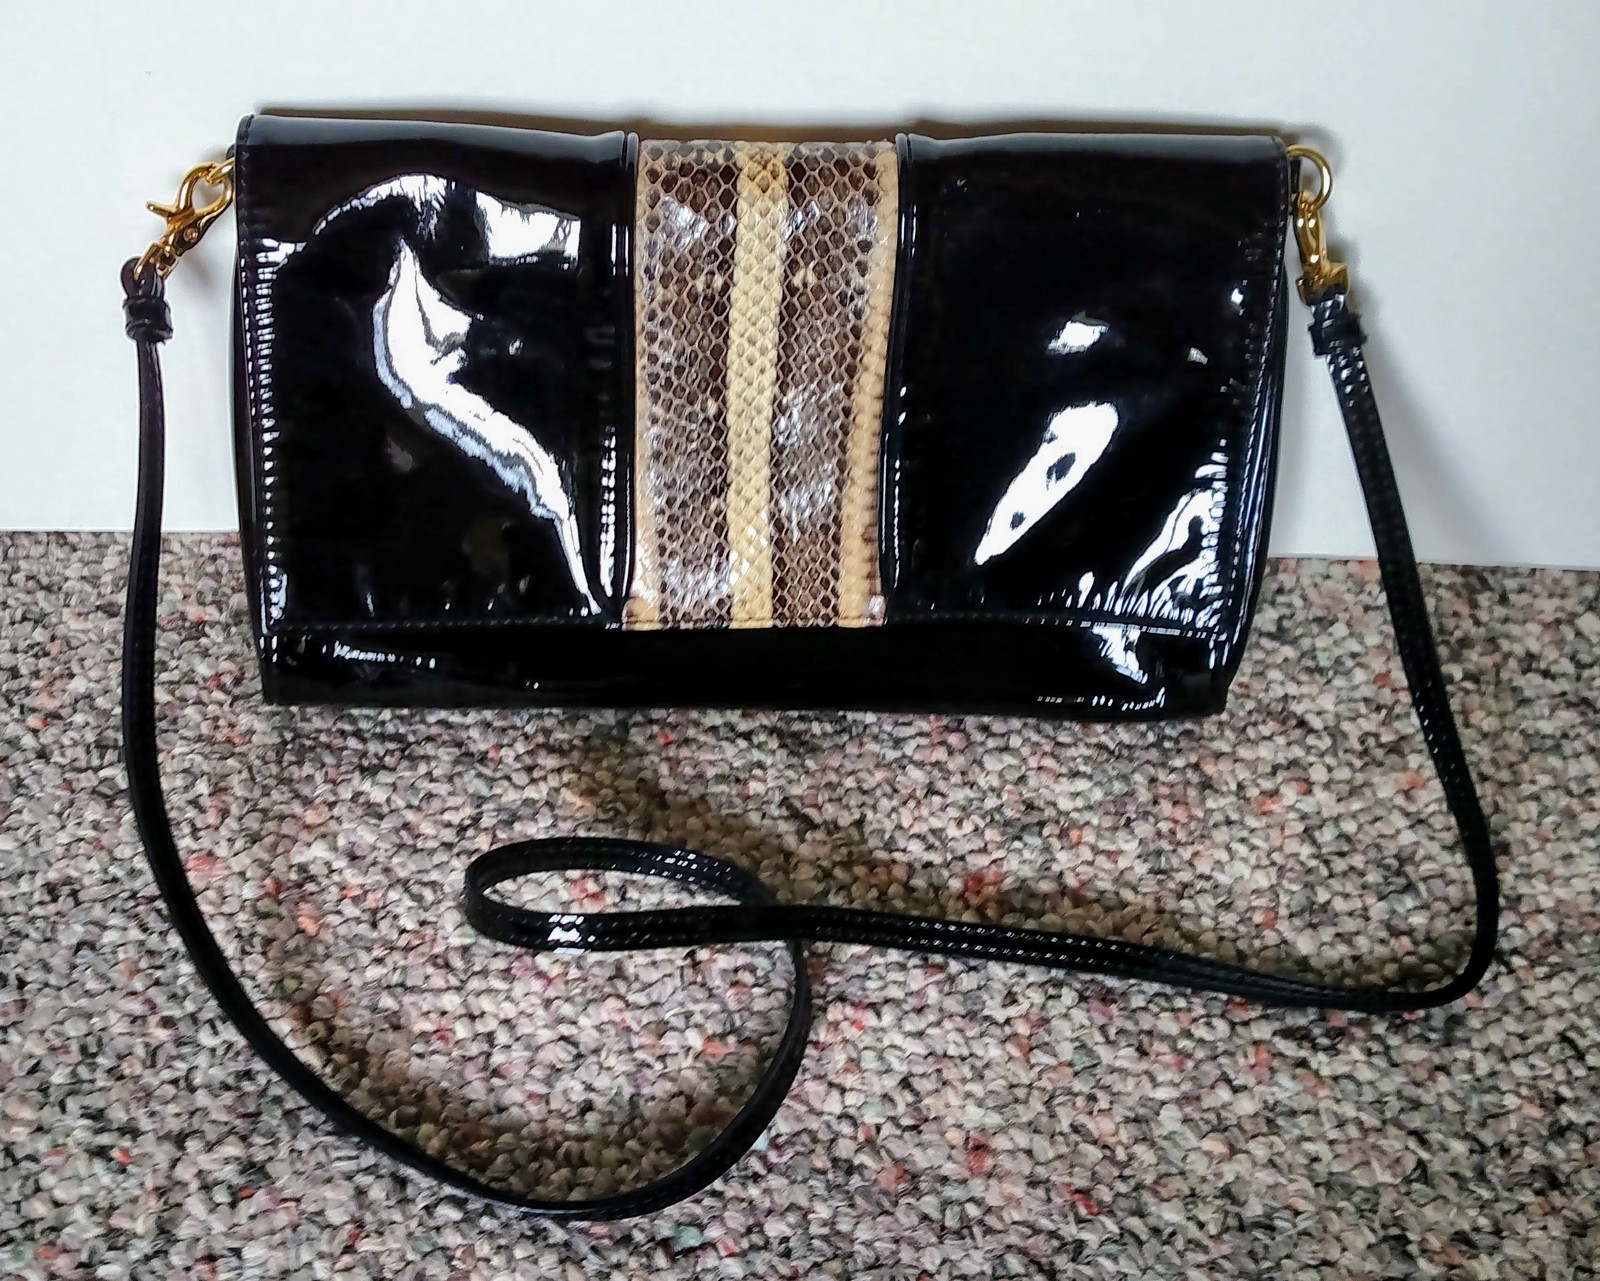 ** REDUCED ** Black Patent Leather & Snakeskin purse, clutch, over ...